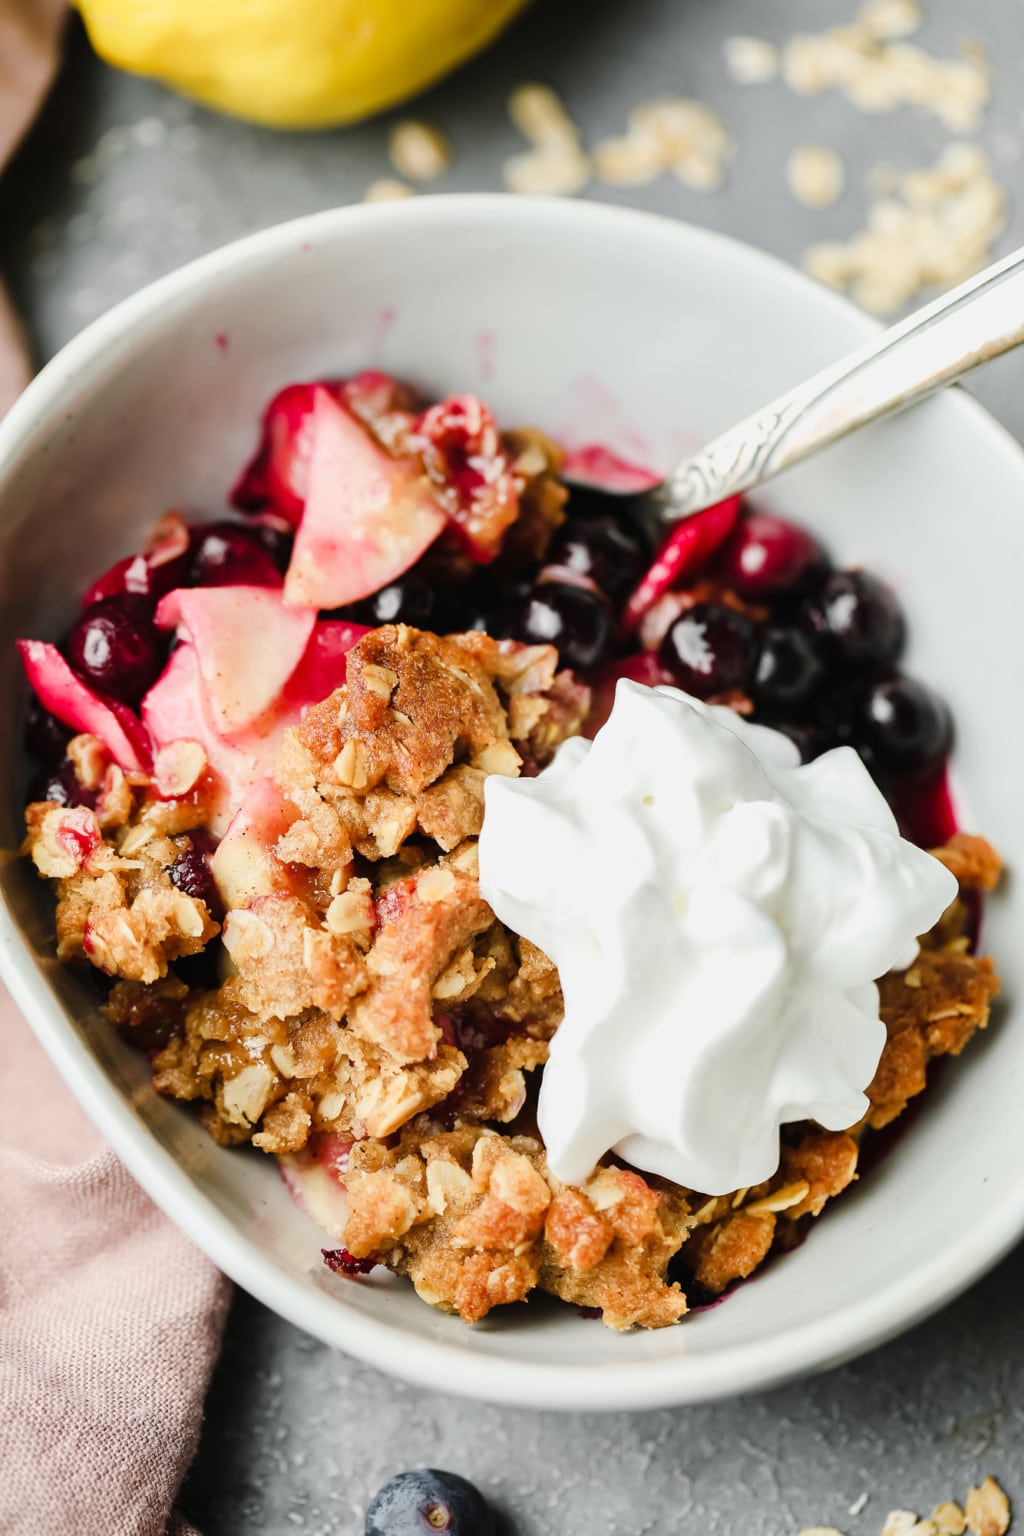 Apple and Blueberry Crumble - Nora Cooks